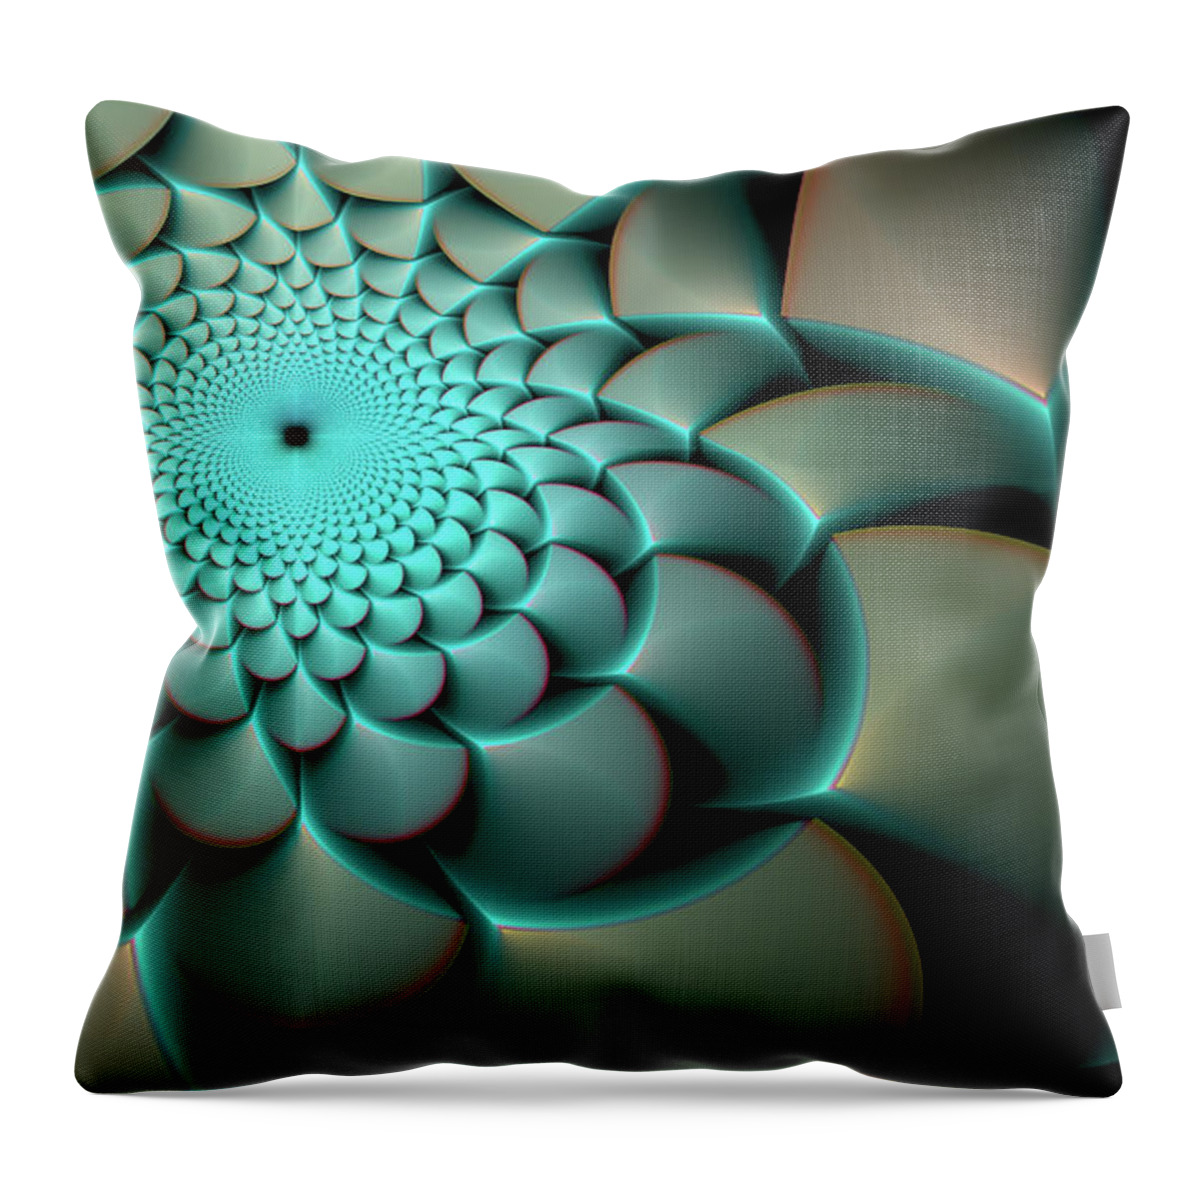 Jude Throw Pillow featuring the digital art Jude by Missy Gainer